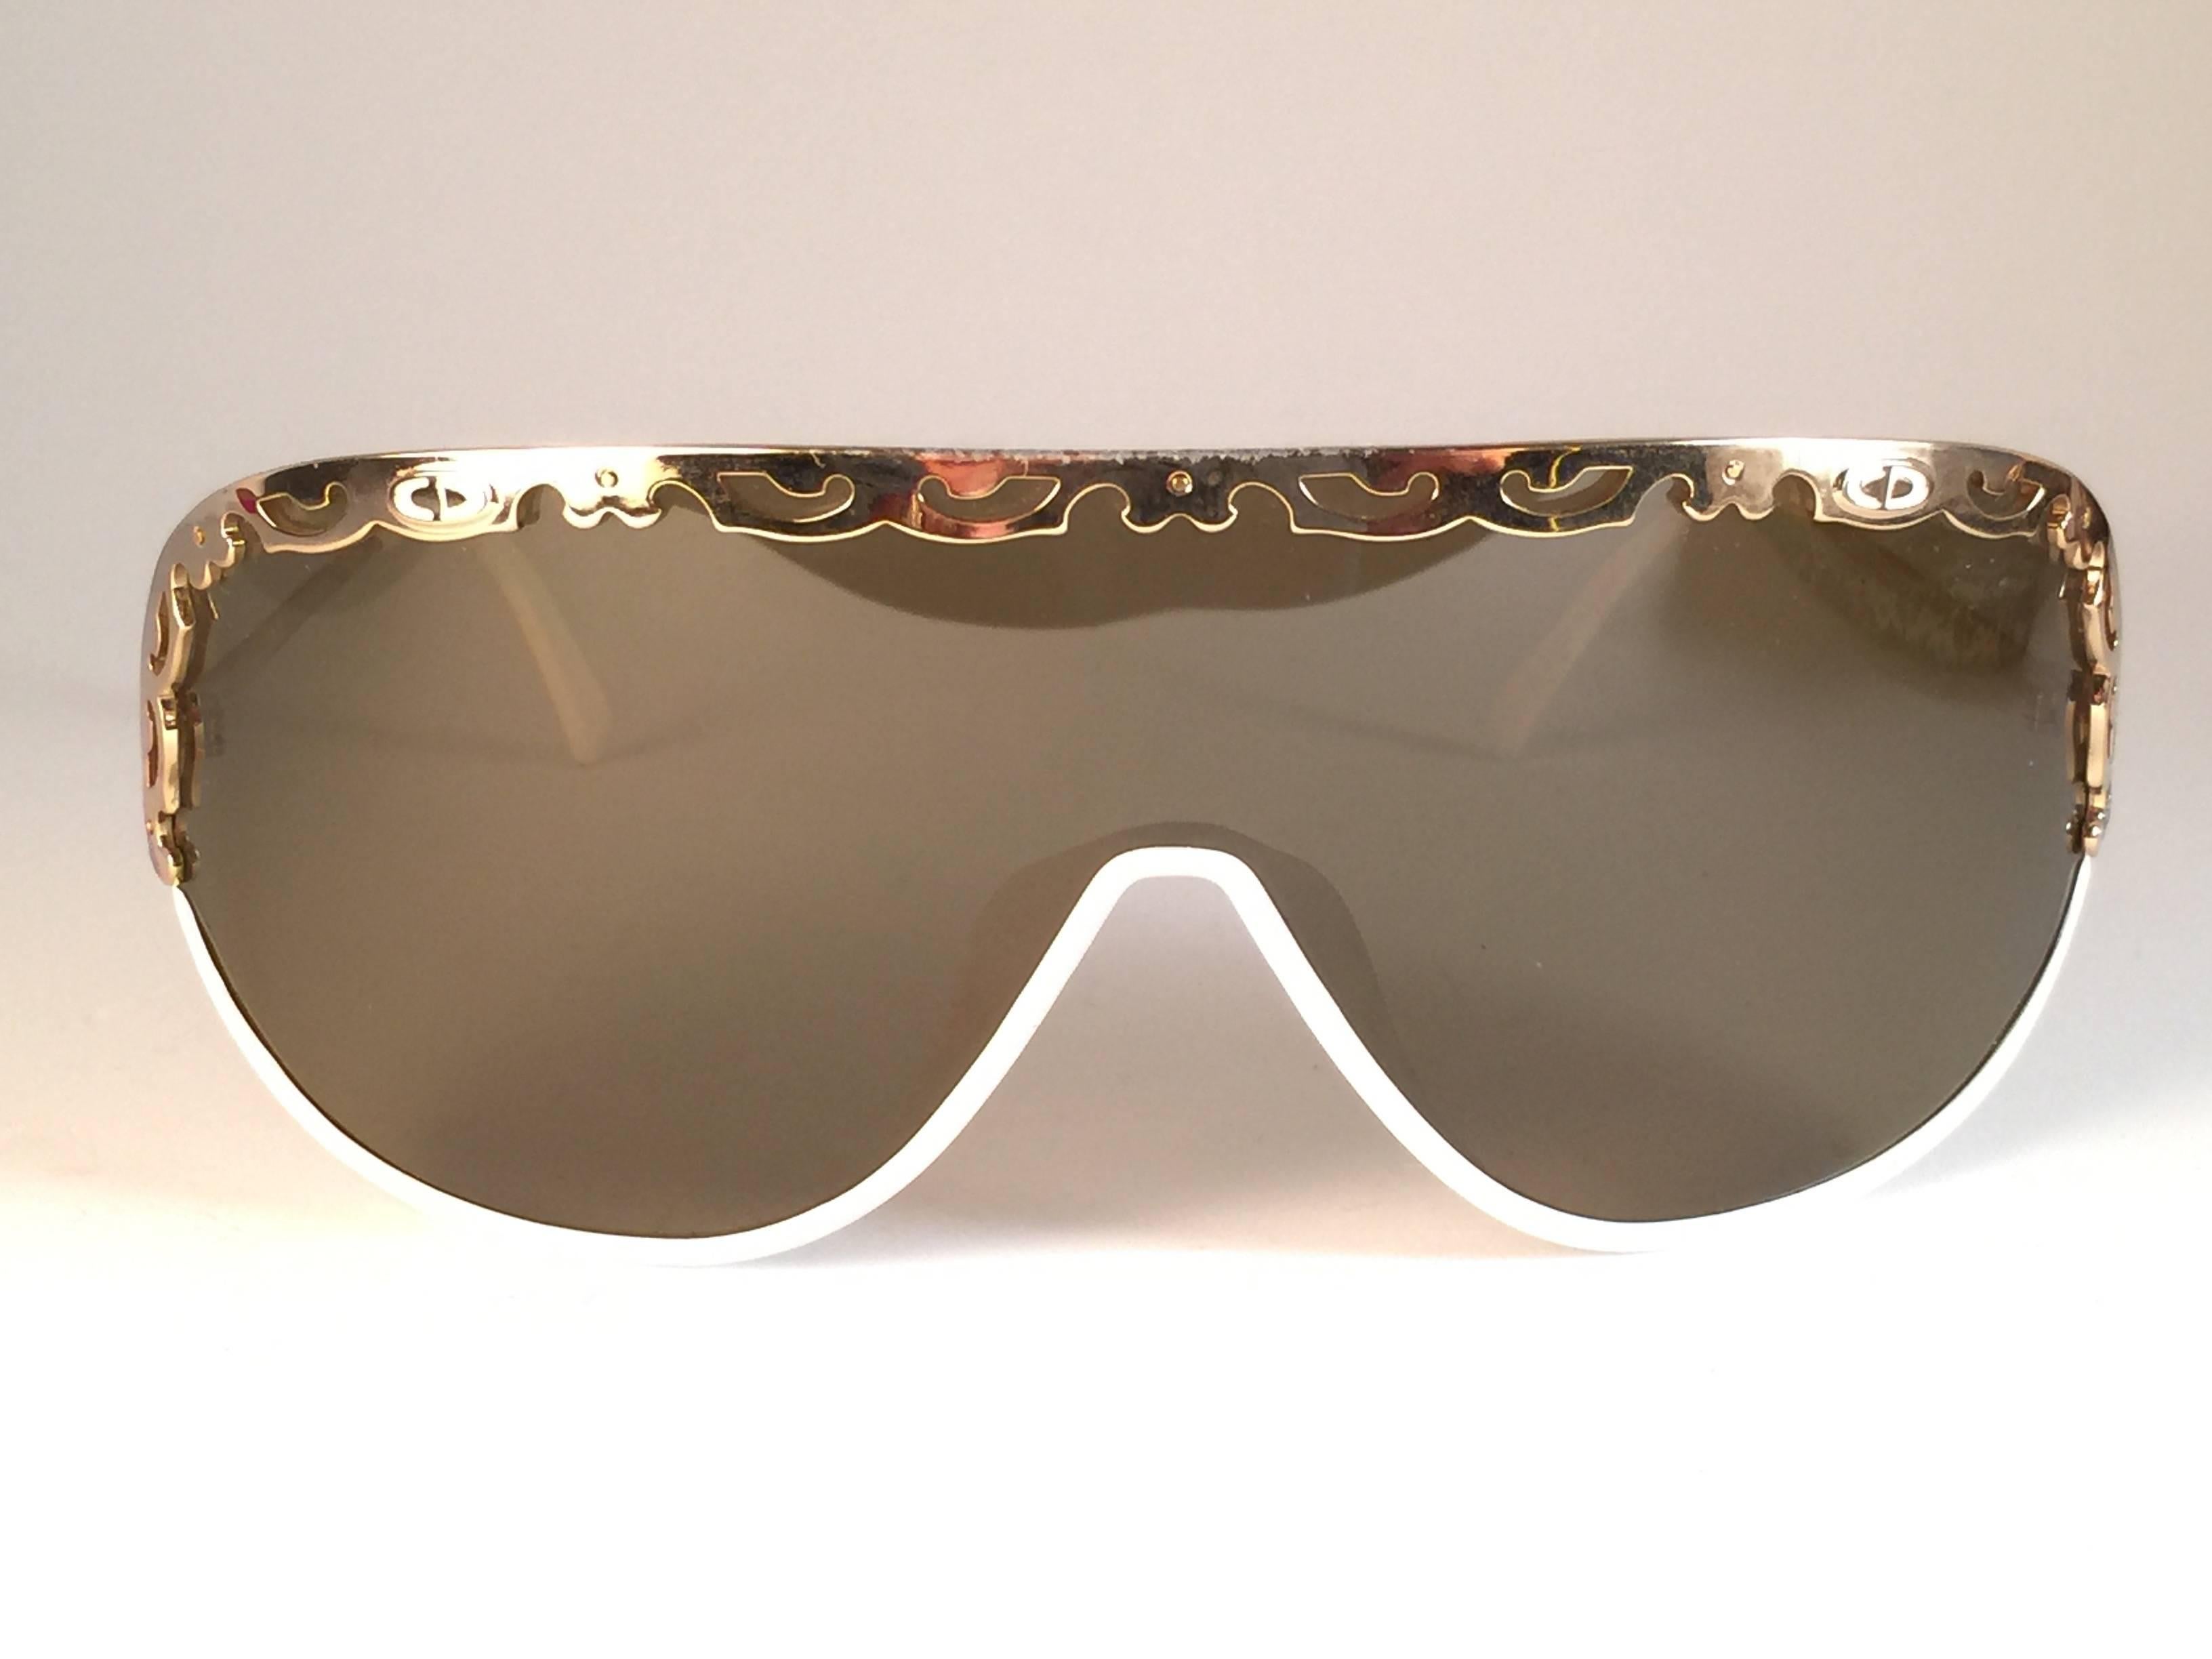 New Vintage Christian Dior 2501 white mask sunglasses wrap around style with solid brown lenses 1980’s. 
This item may show light sign of wear due to storage.  Made by Optyl. Manufactured in Austria